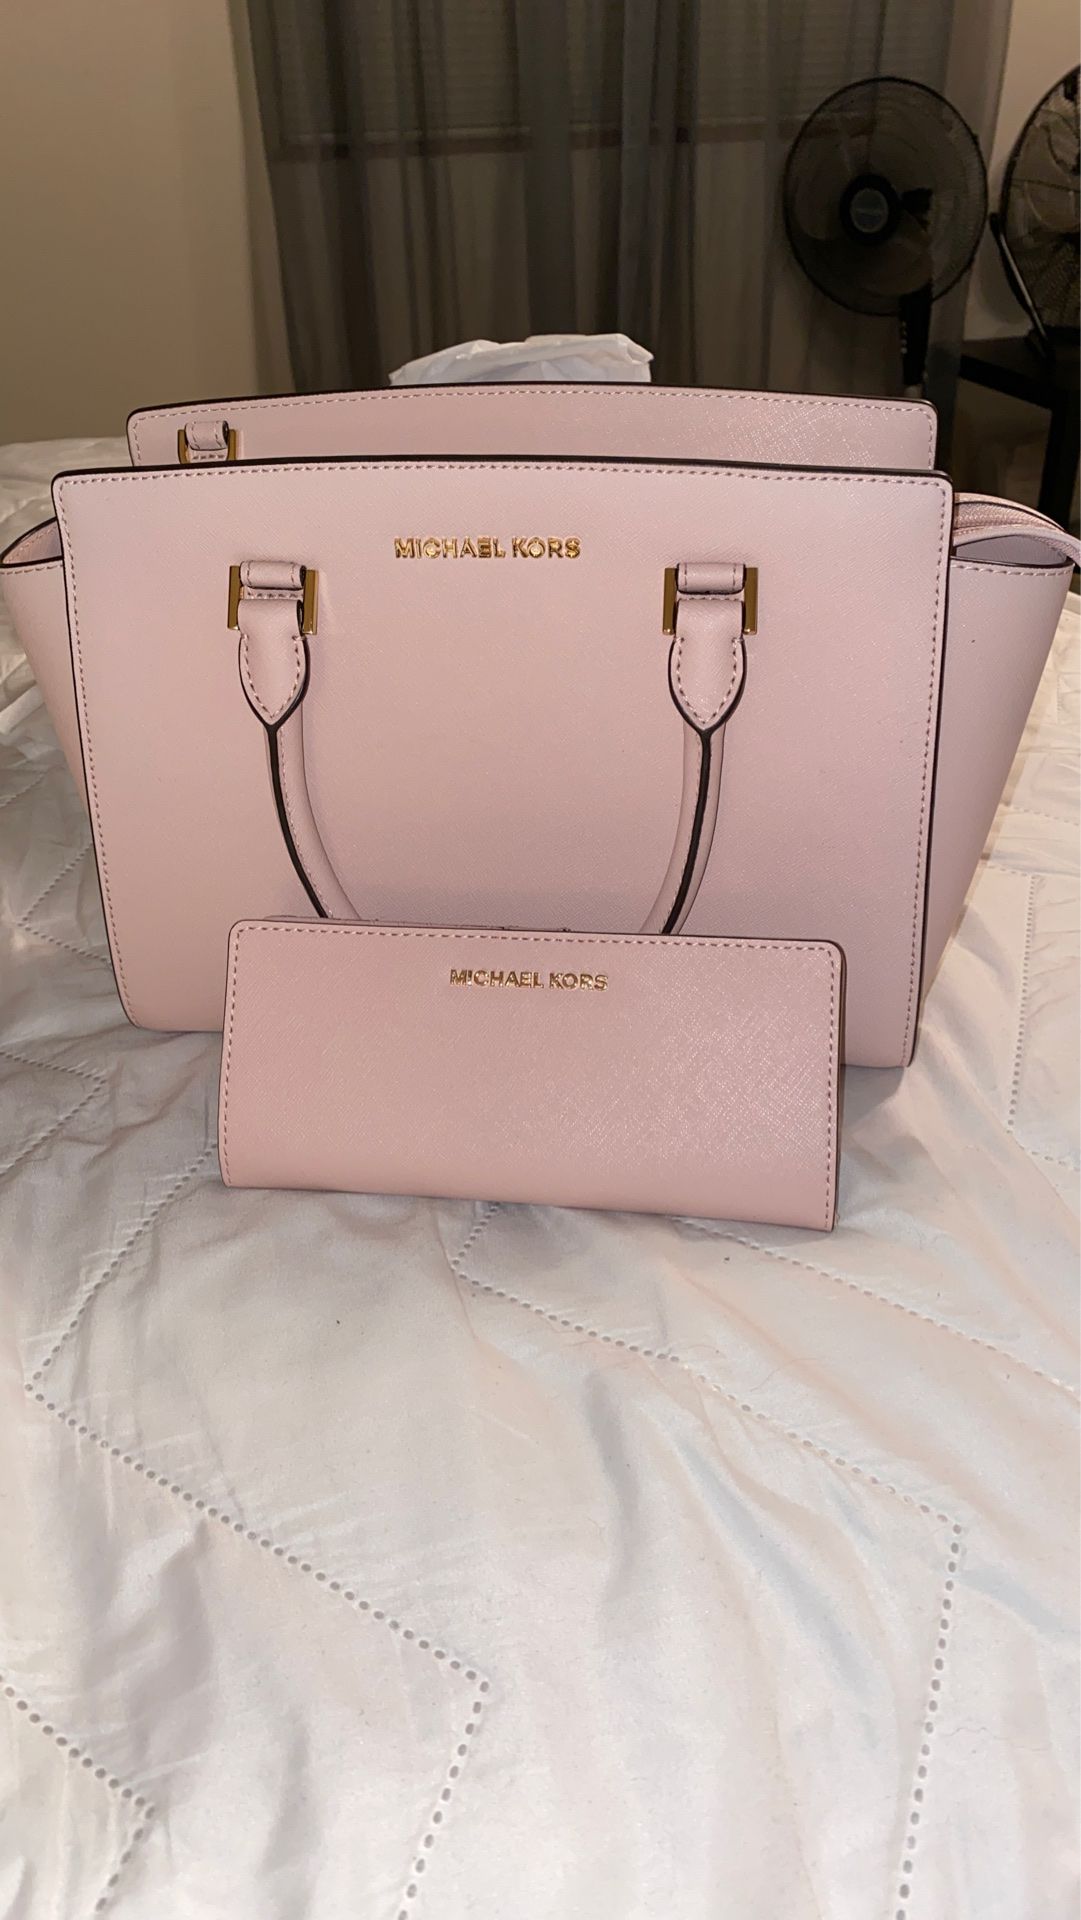 Pink Michael kors purse and wallet